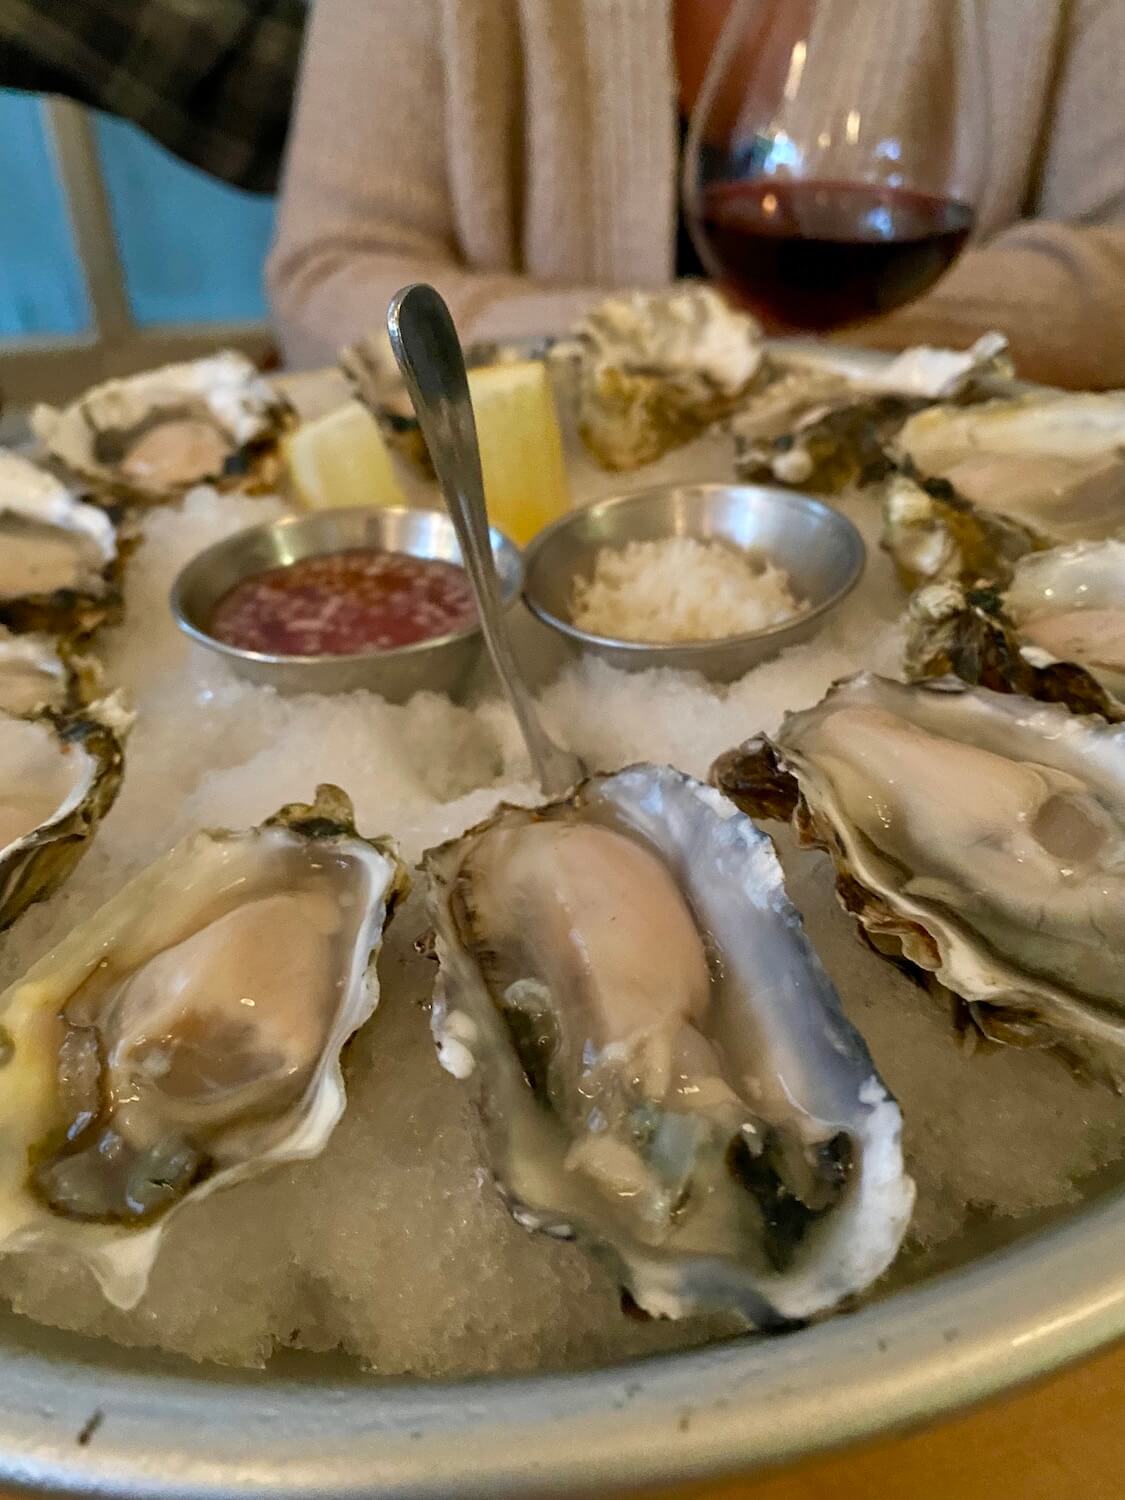 Fresh raw oysters are loaded onto a tray and packed with ice at Finistere Restaurant in Port Townsend, Washington. In the background someone is drinking a glass of red wine.